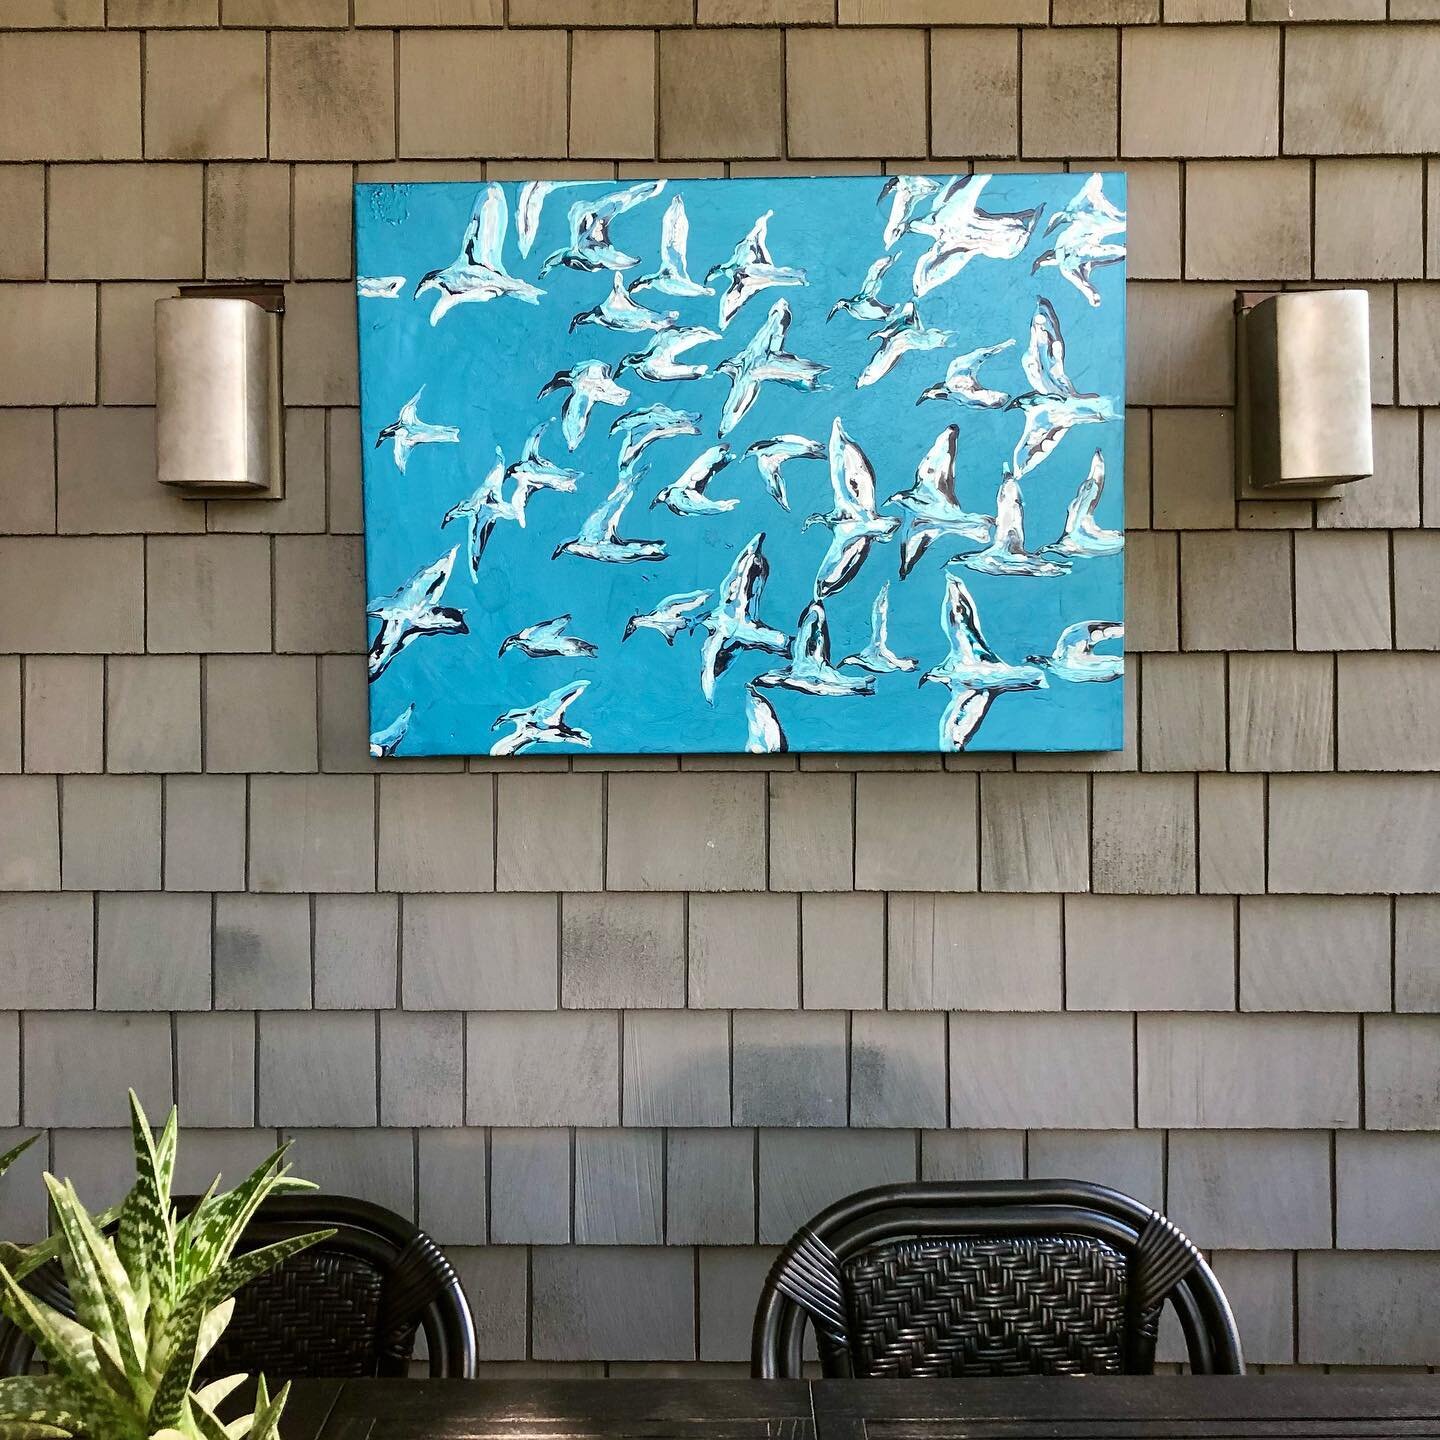 New fluid acrylic art for the porch! &ldquo;Flying Home&rdquo; 36 x 48&rdquo; on panel. All my panels are perfect for a covered porch! DM me for details or to order your custom art!